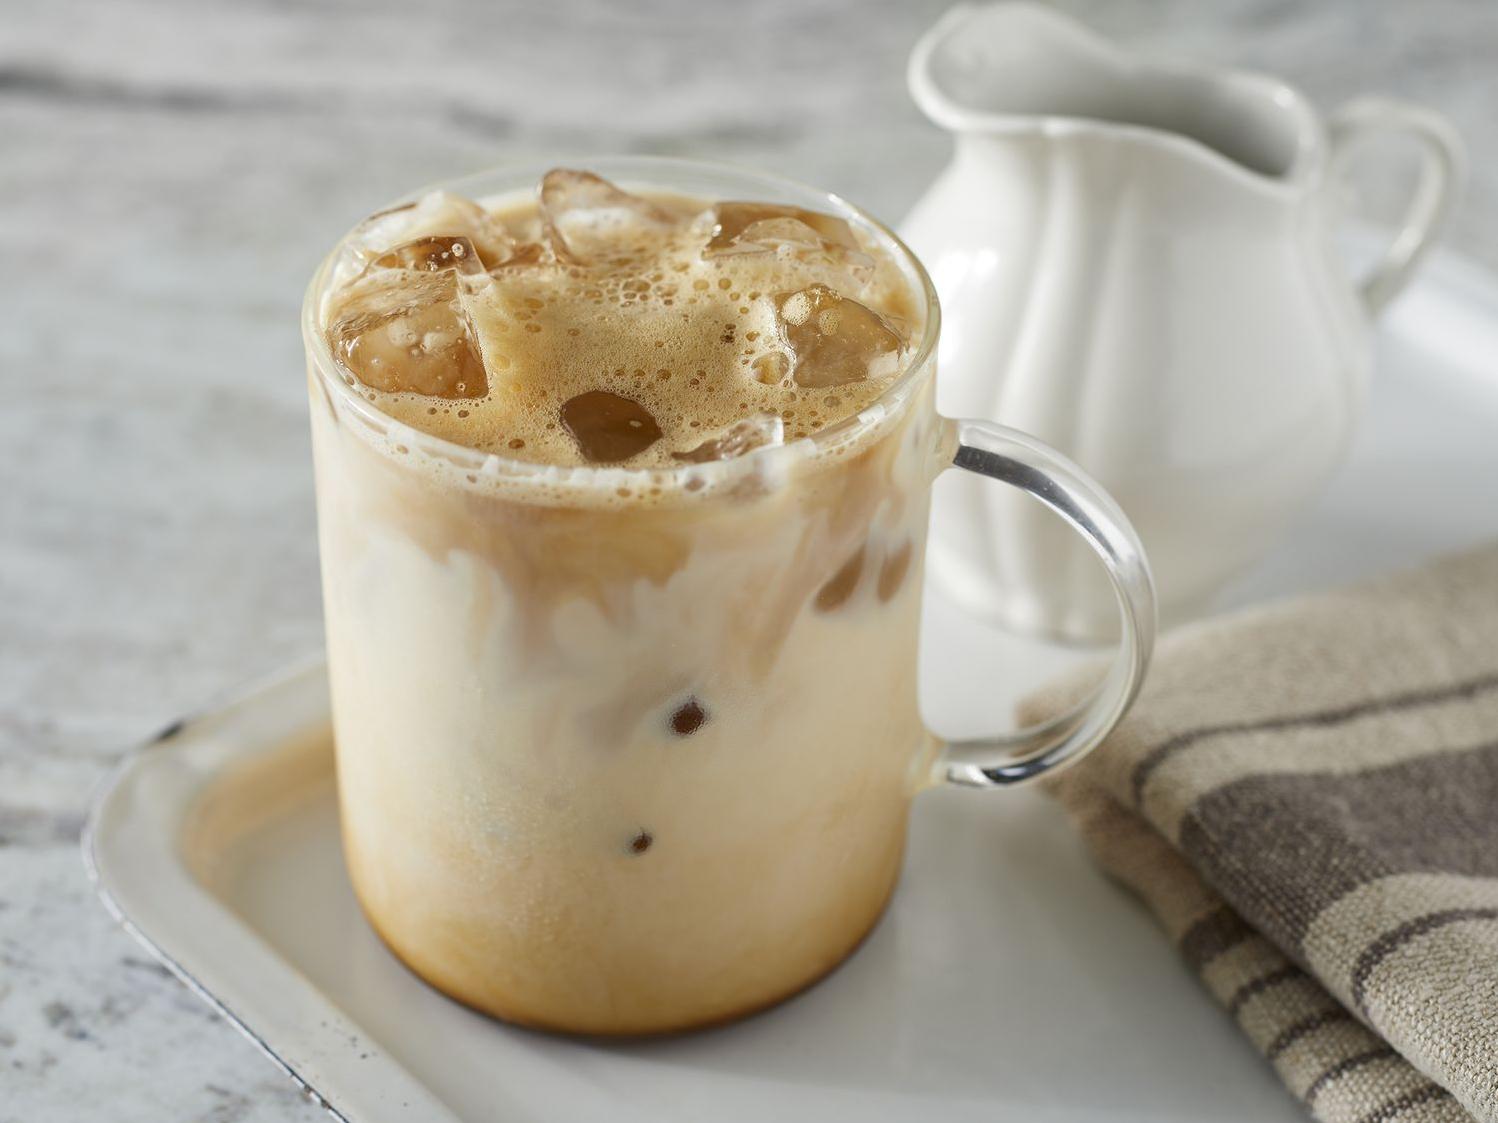  Don't let the heat ruin your coffee cravings--try our Iced Coffee recipe!